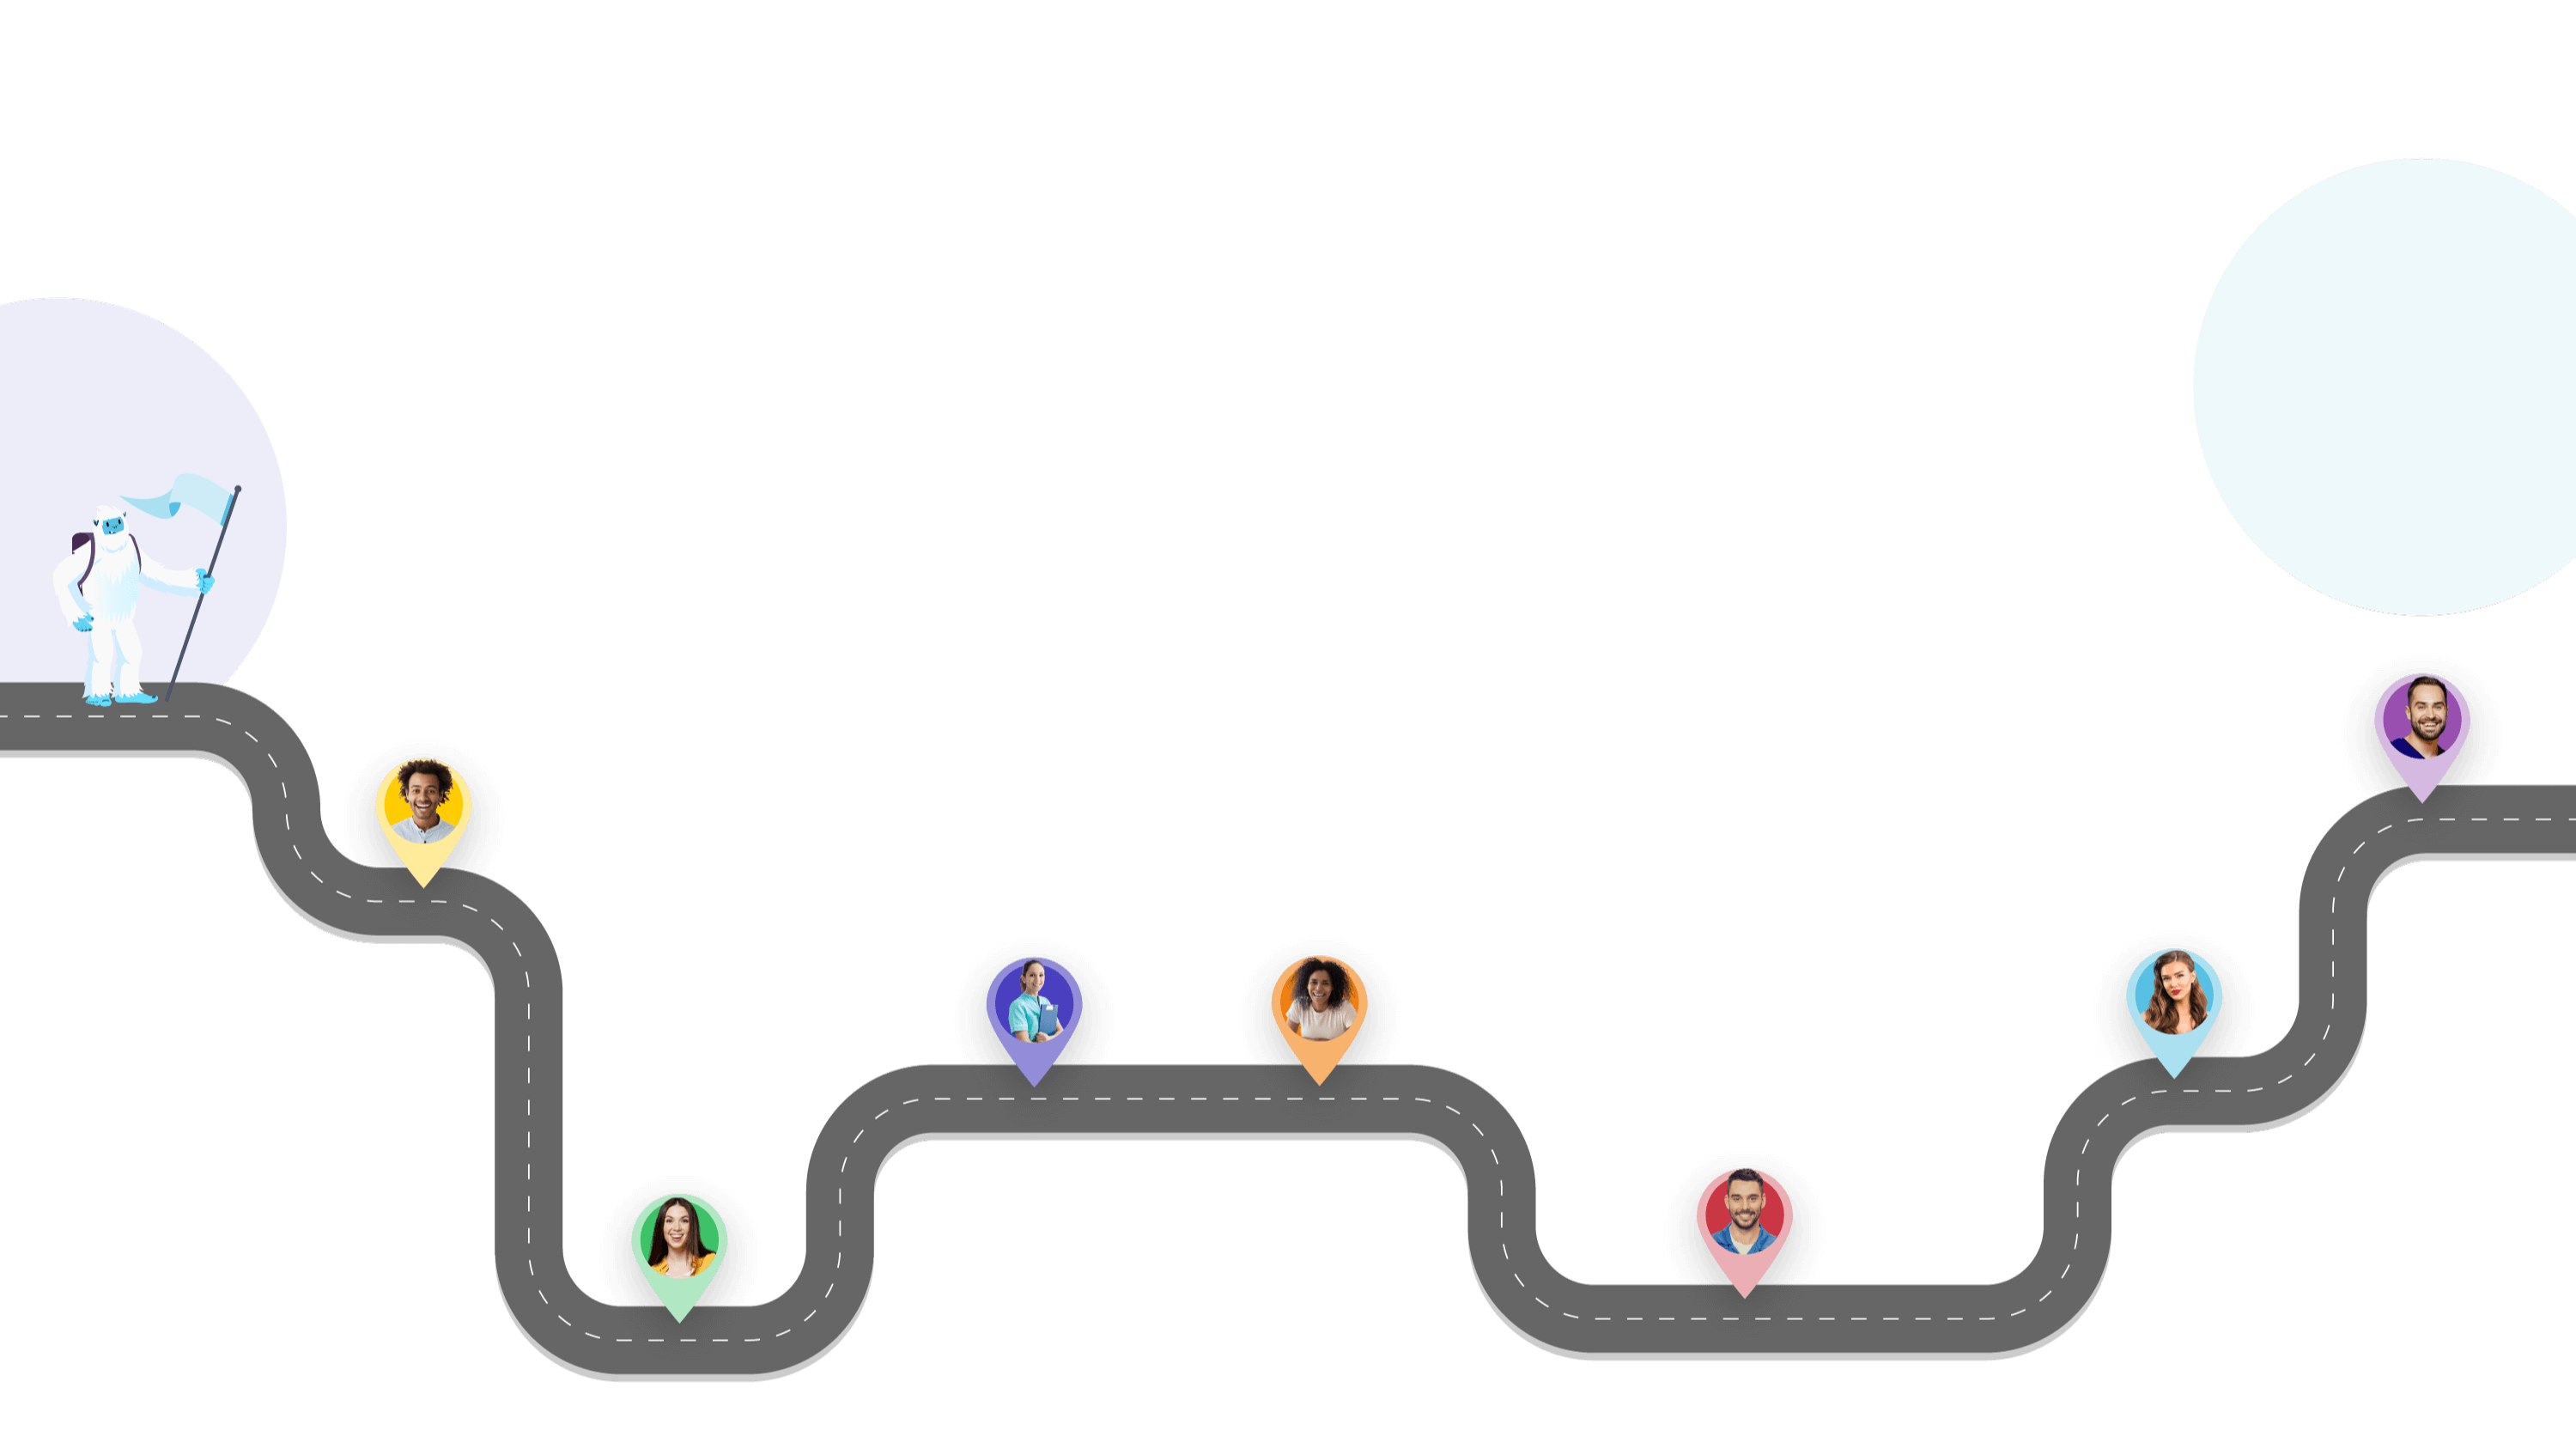 Illustration of a road with icons pointing out different parts of the journey to represent employee experience.